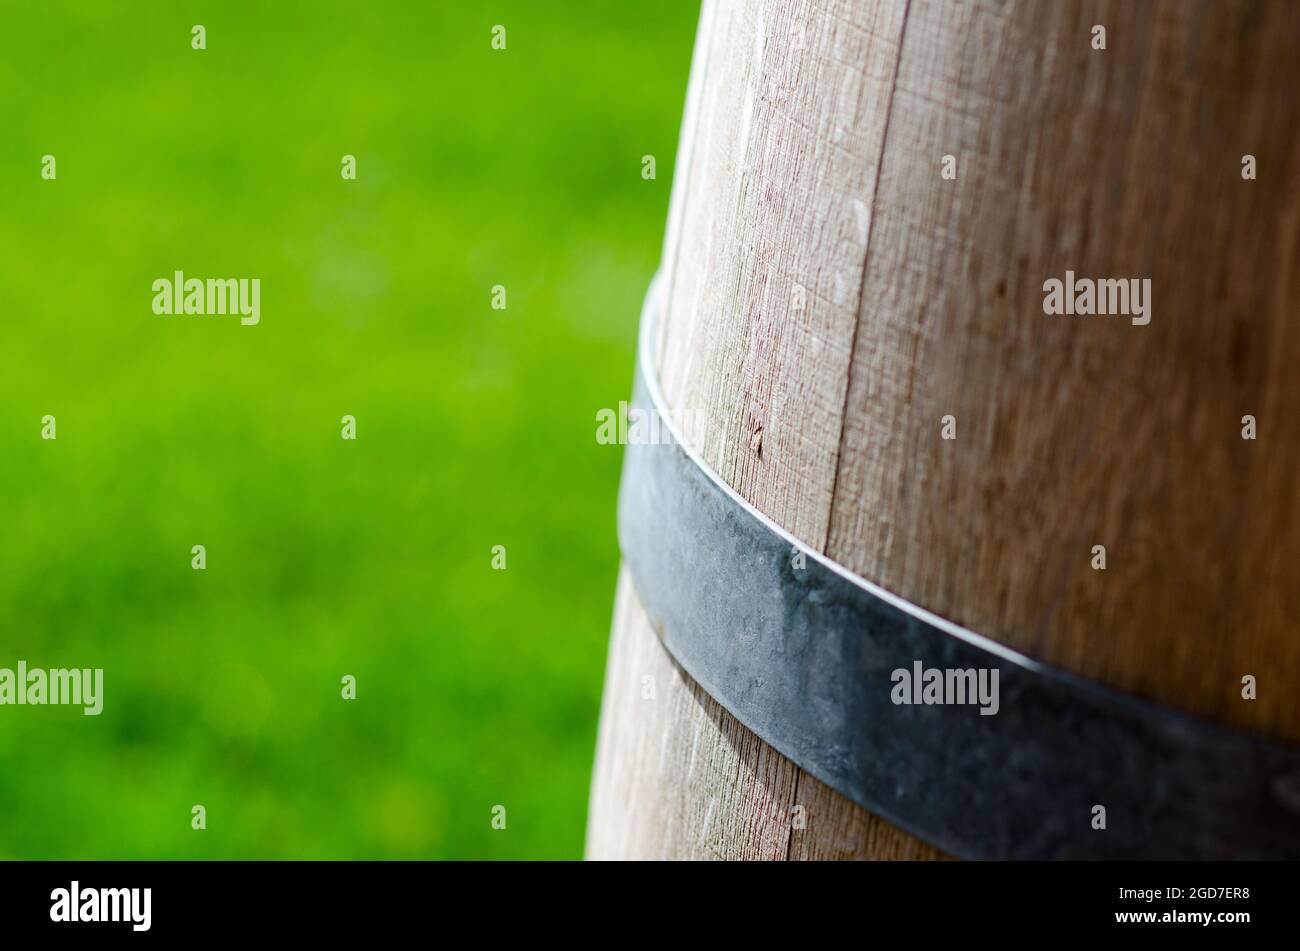 wooden barrel: detail, precious woods are always used to age, transport, store products such as wine, beer and spirits. Stock Photo